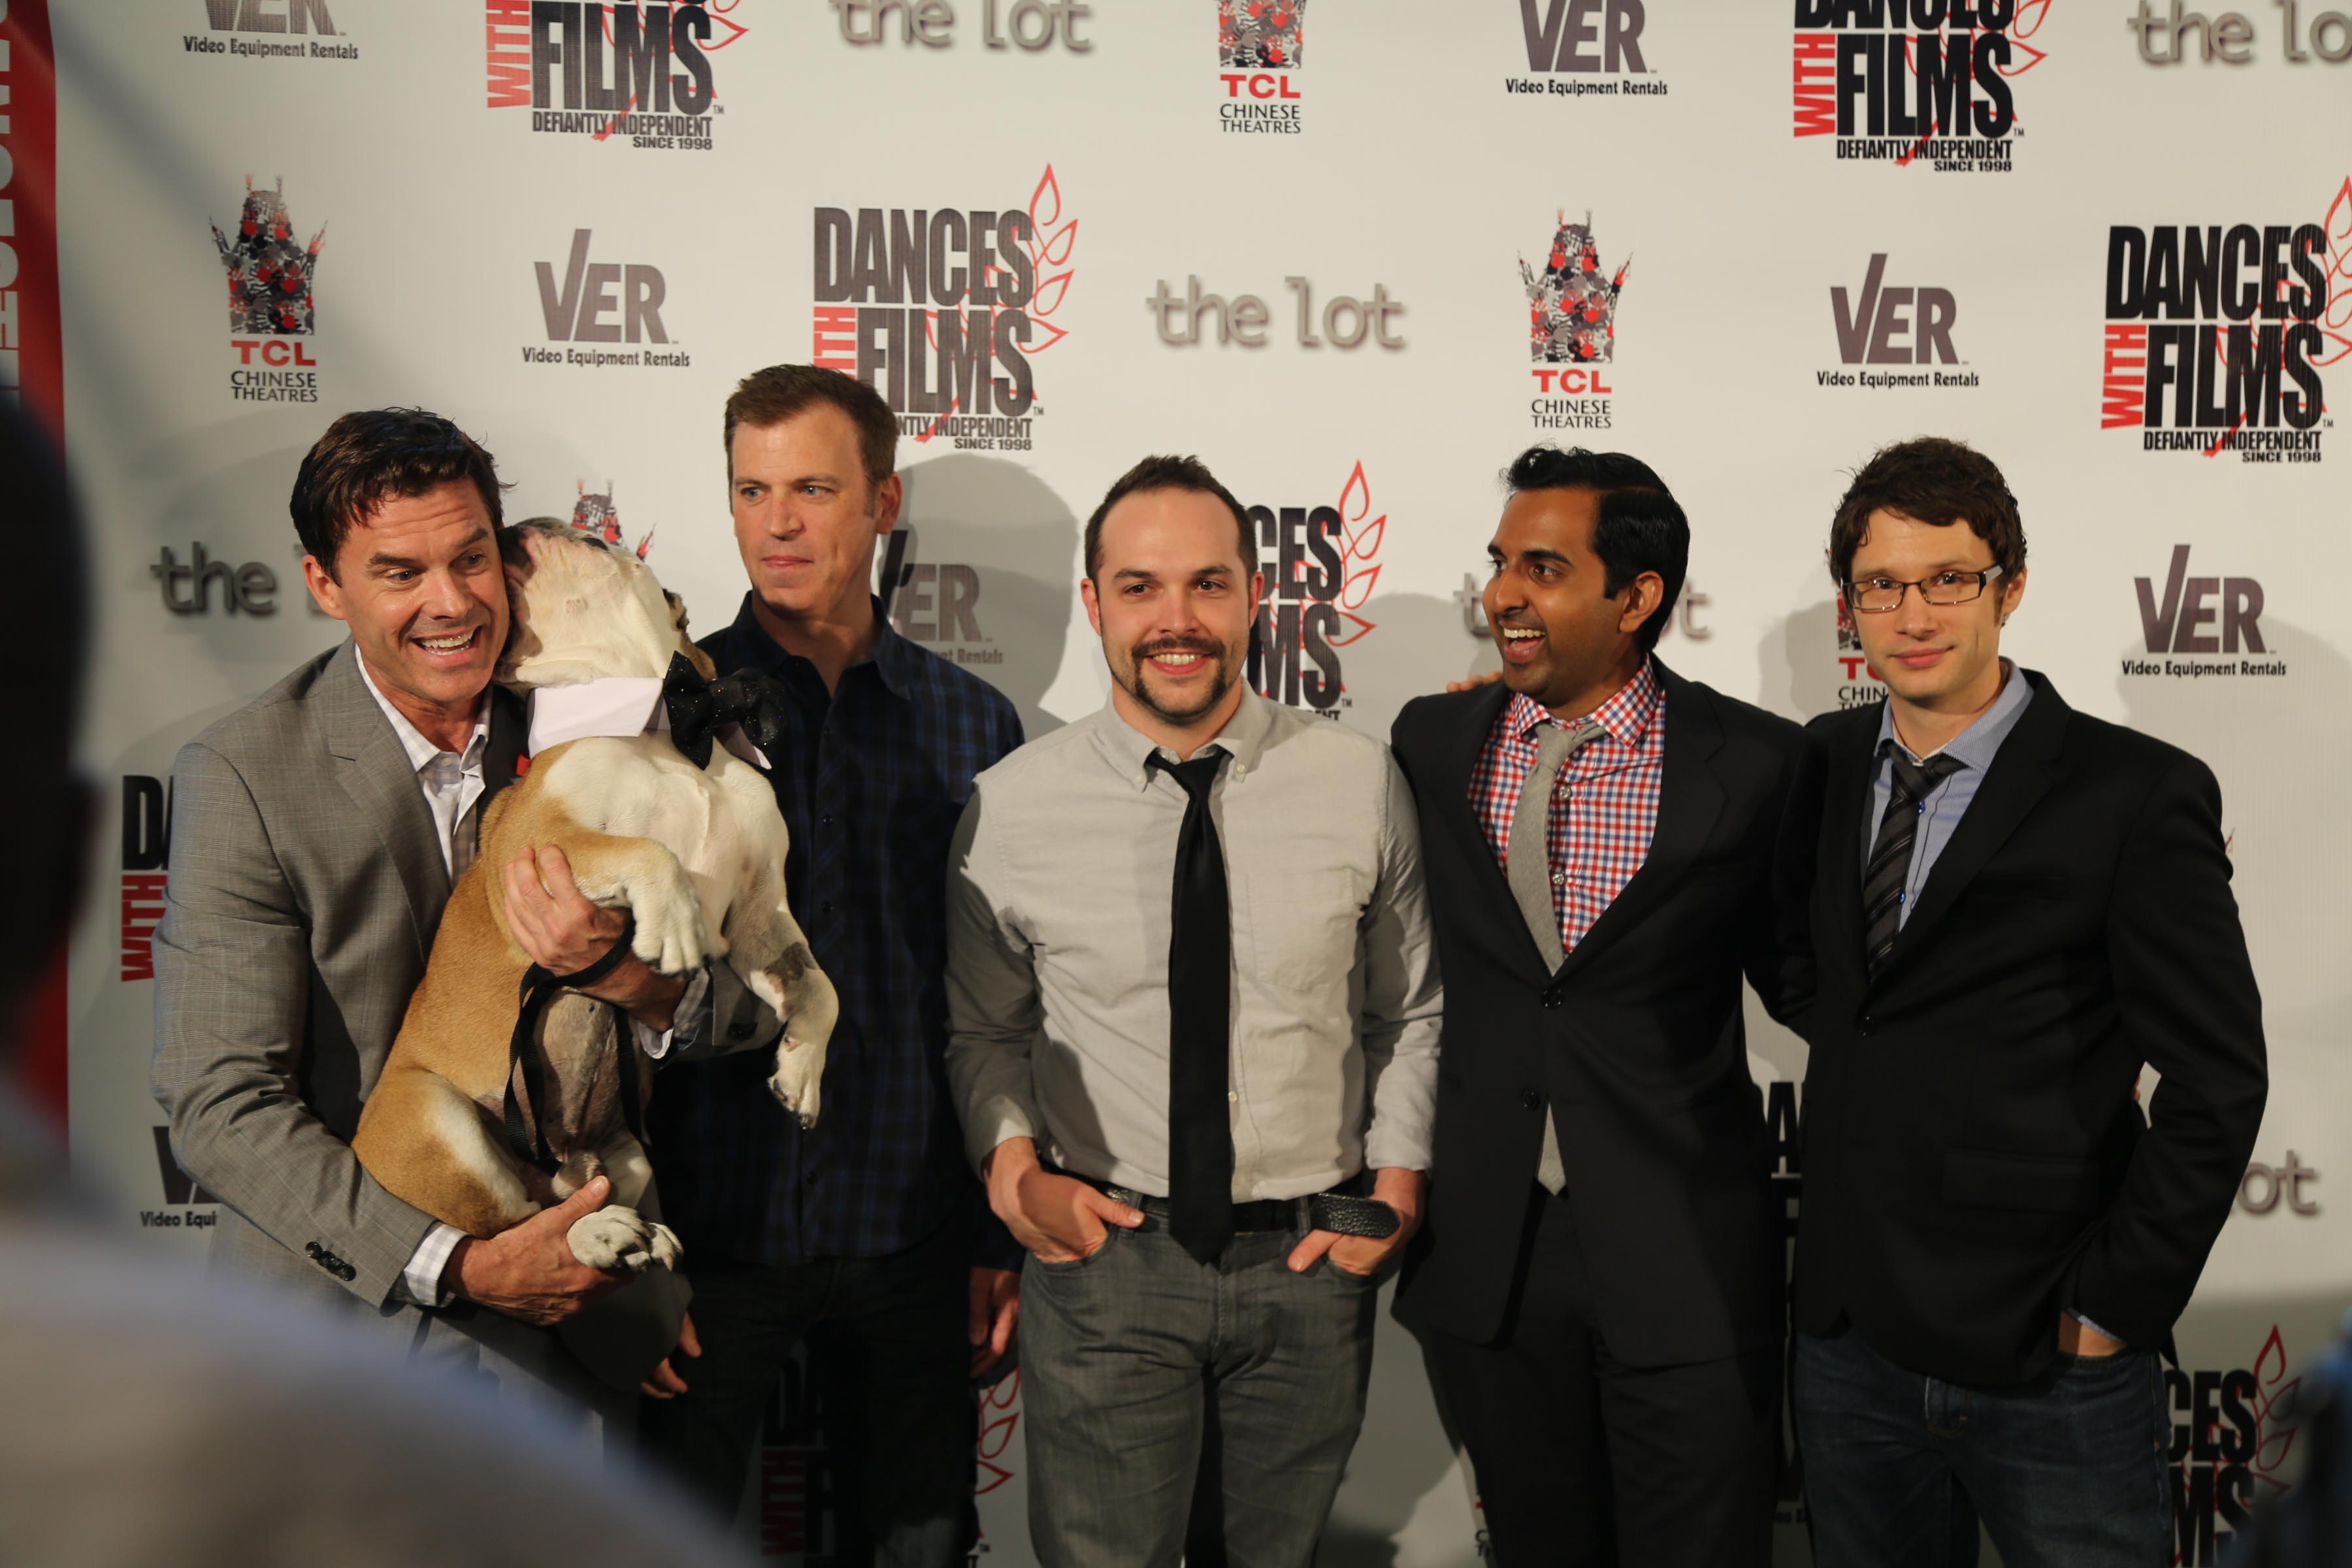 At 'Dances with Films' for the LA premiere of 'Feeding Mr. Baldwin' - Laird Macintosh, Buster the Dog, Andrew Donnelly, Will Prescott, Anil Margsahayam, and Dalton Leeb